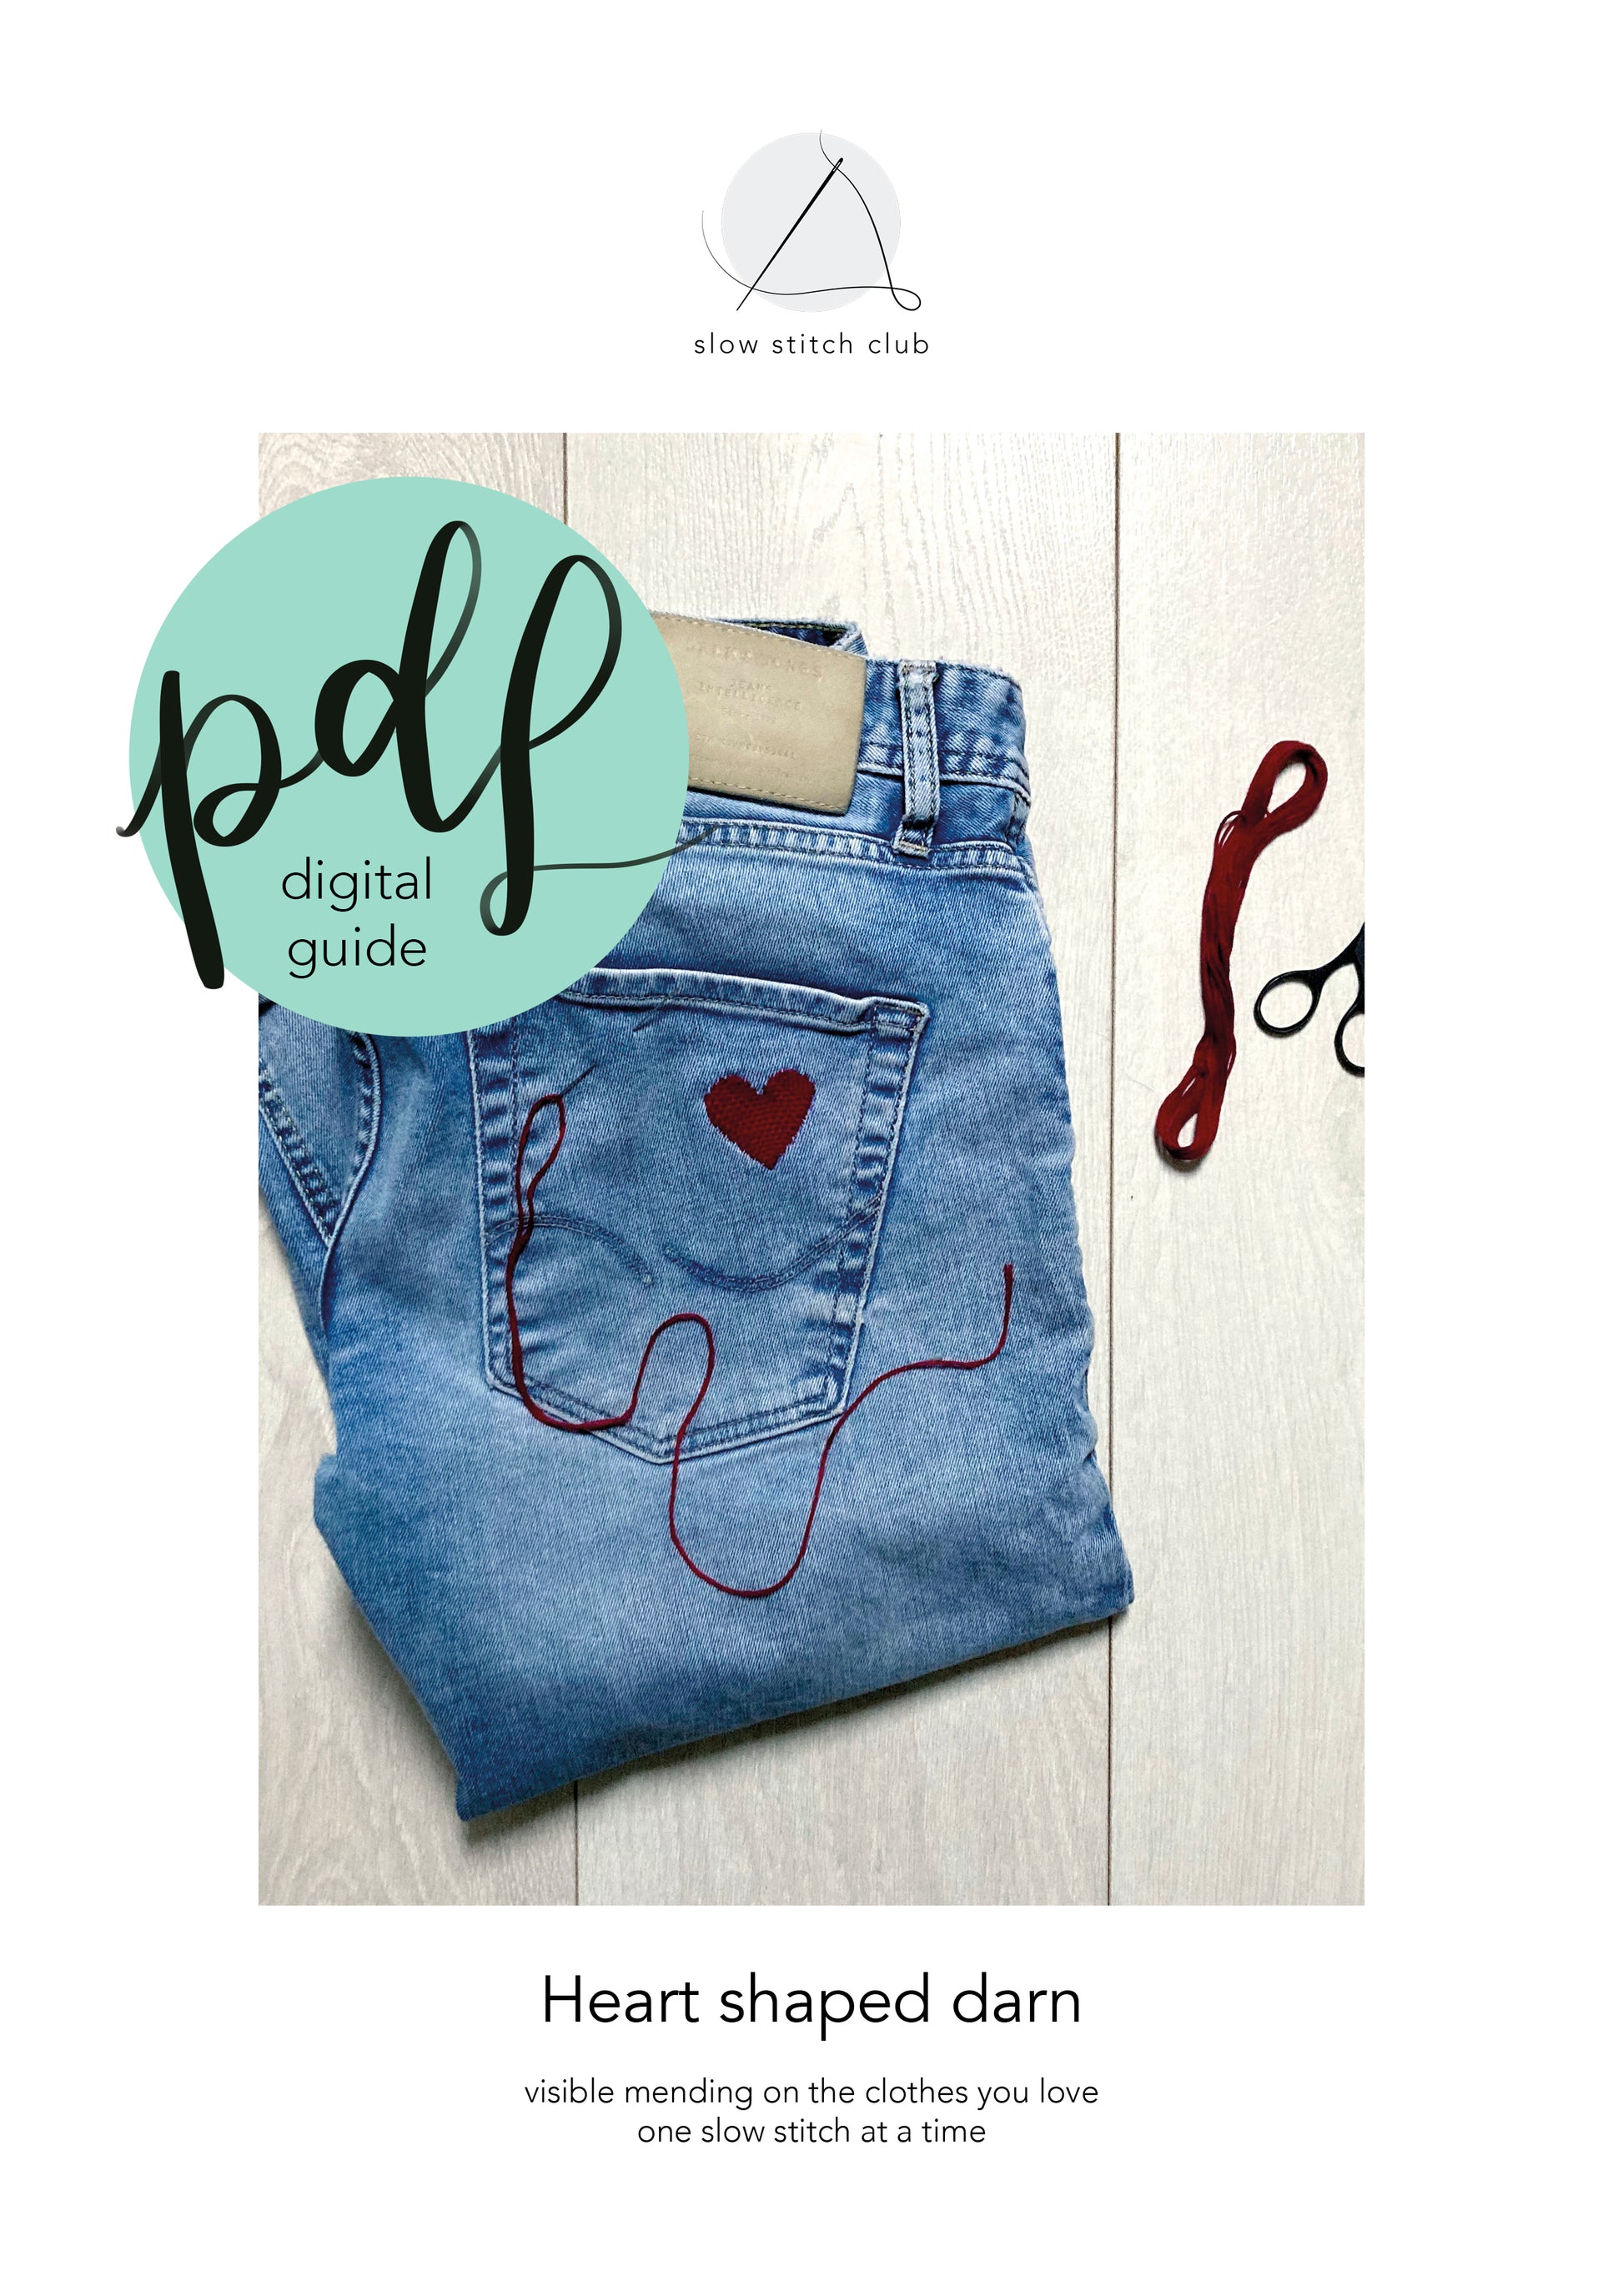 get started with heart shaped darn pdf guide digital download